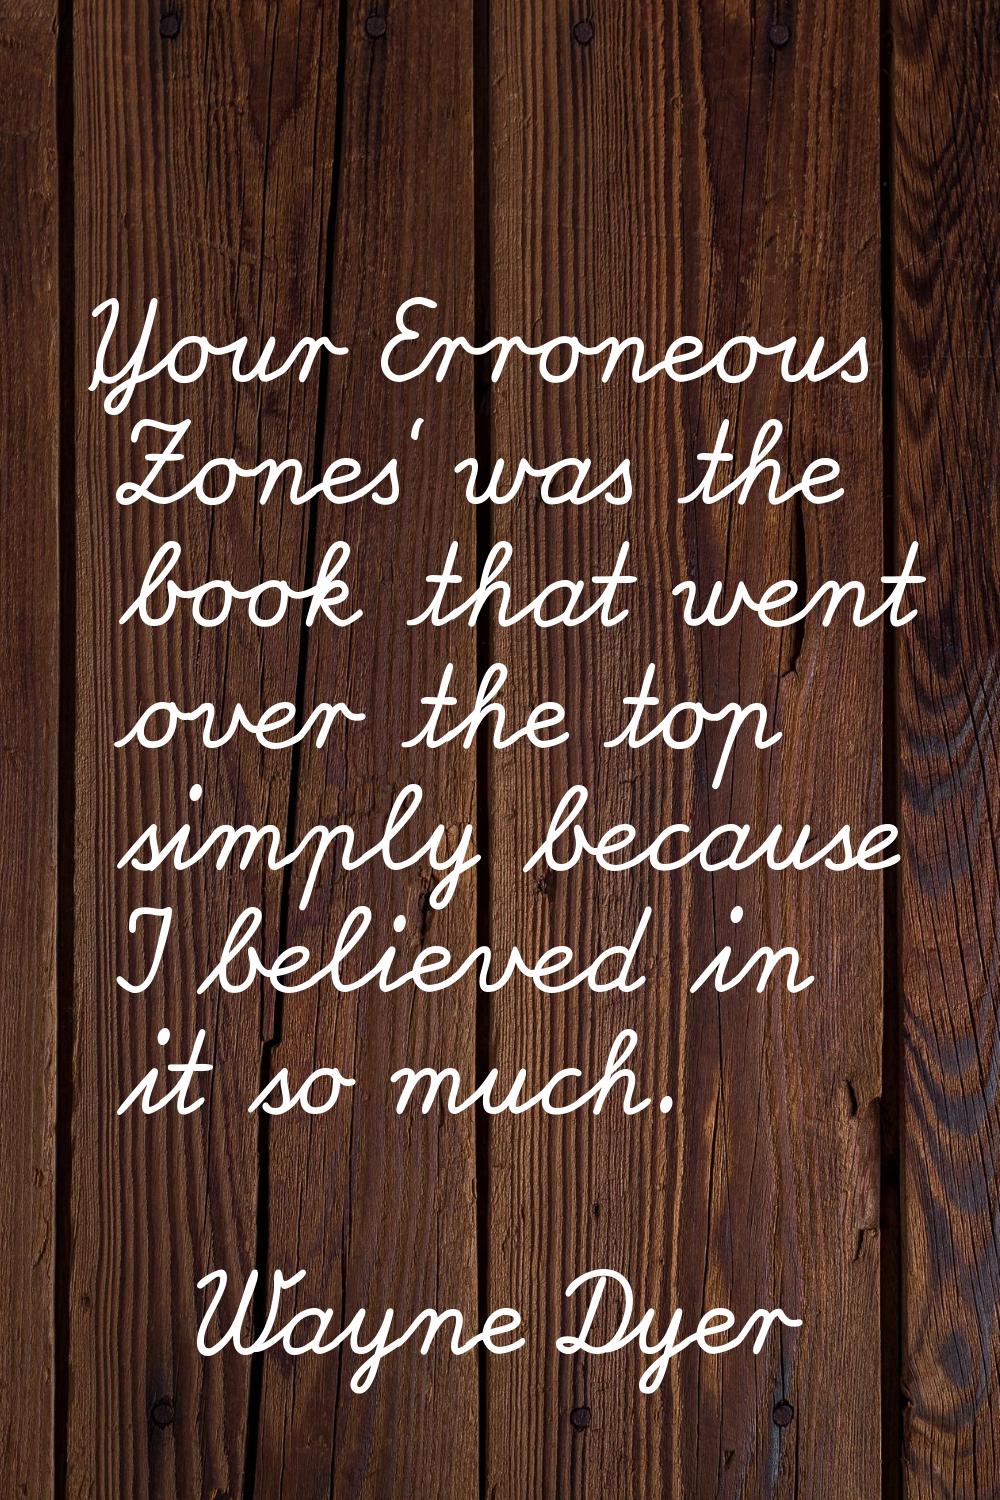 'Your Erroneous Zones' was the book that went over the top simply because I believed in it so much.